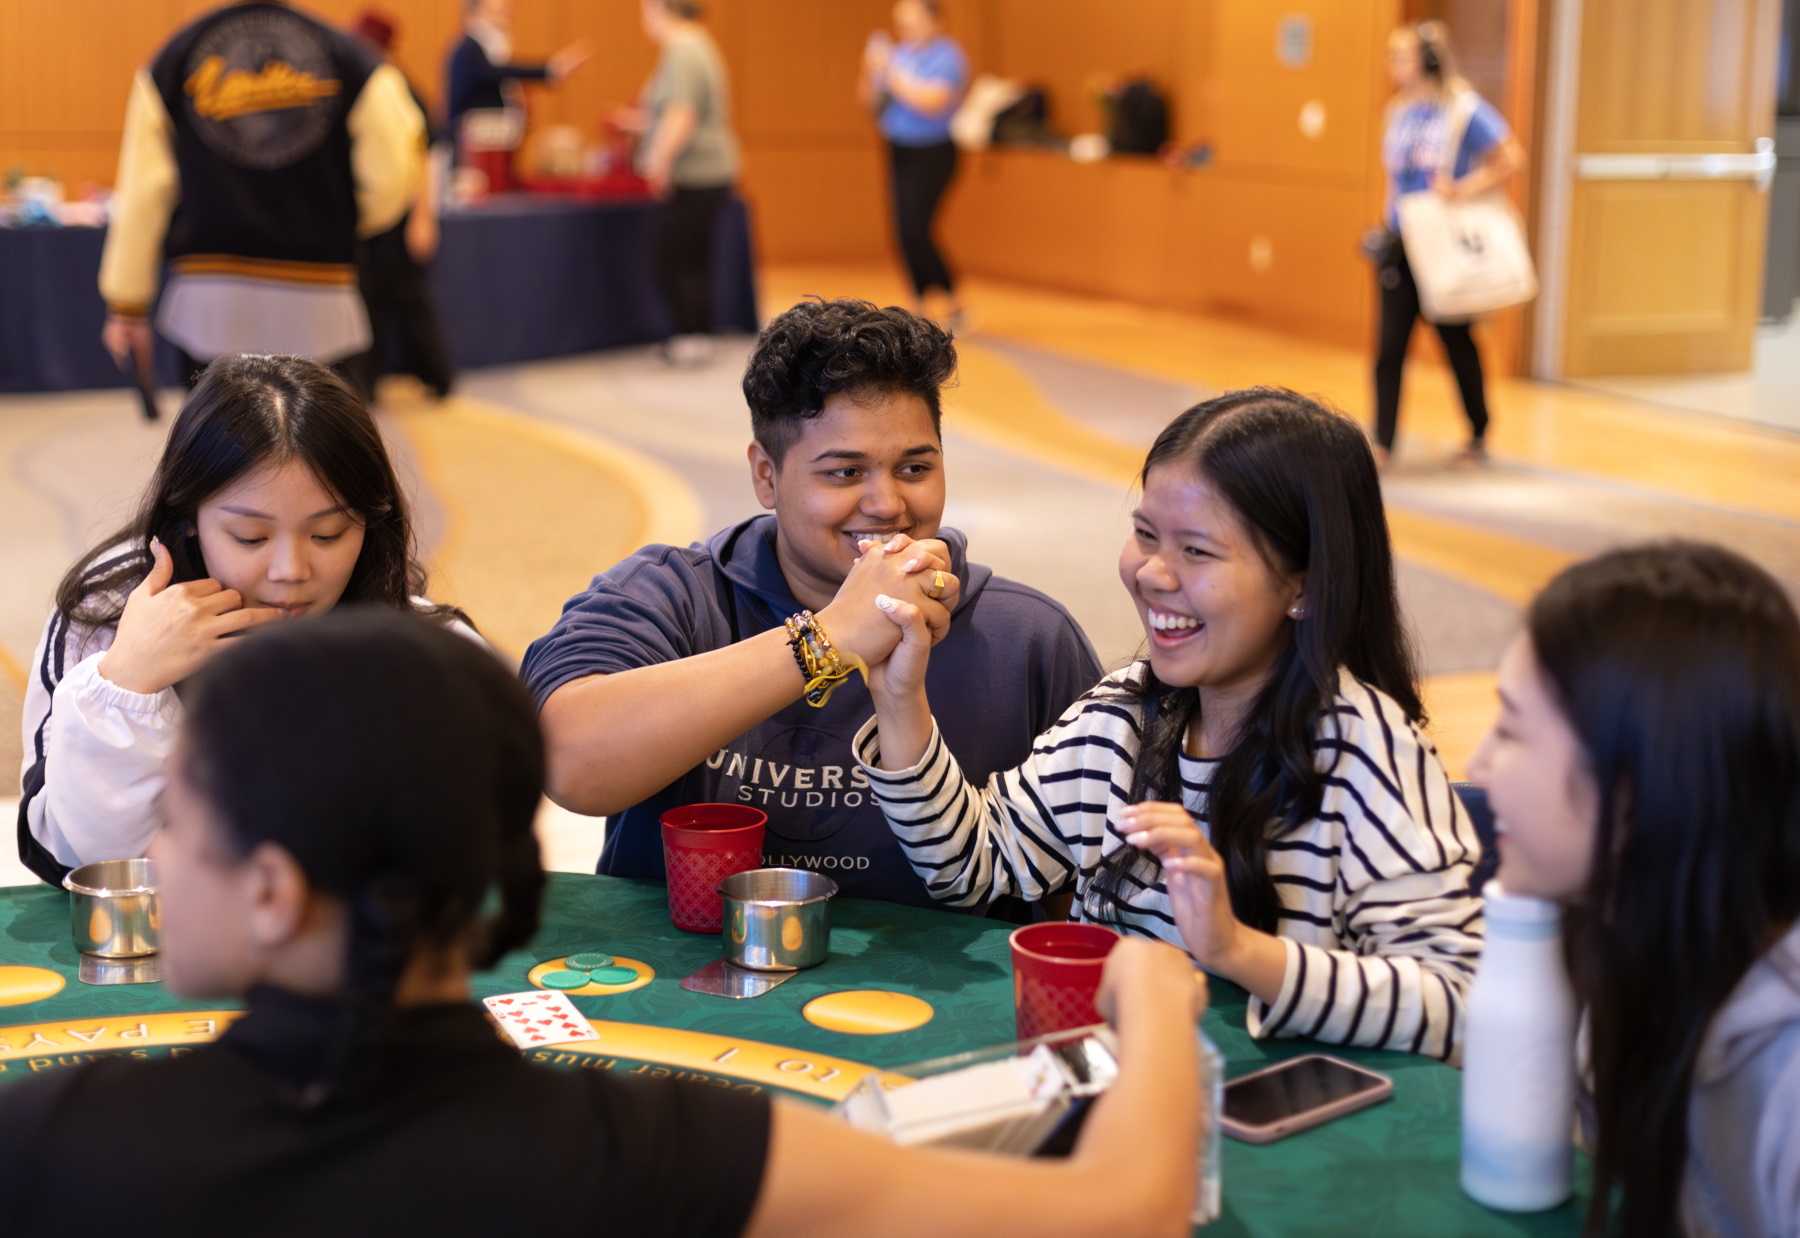 Casino games was part of Welcome Week.